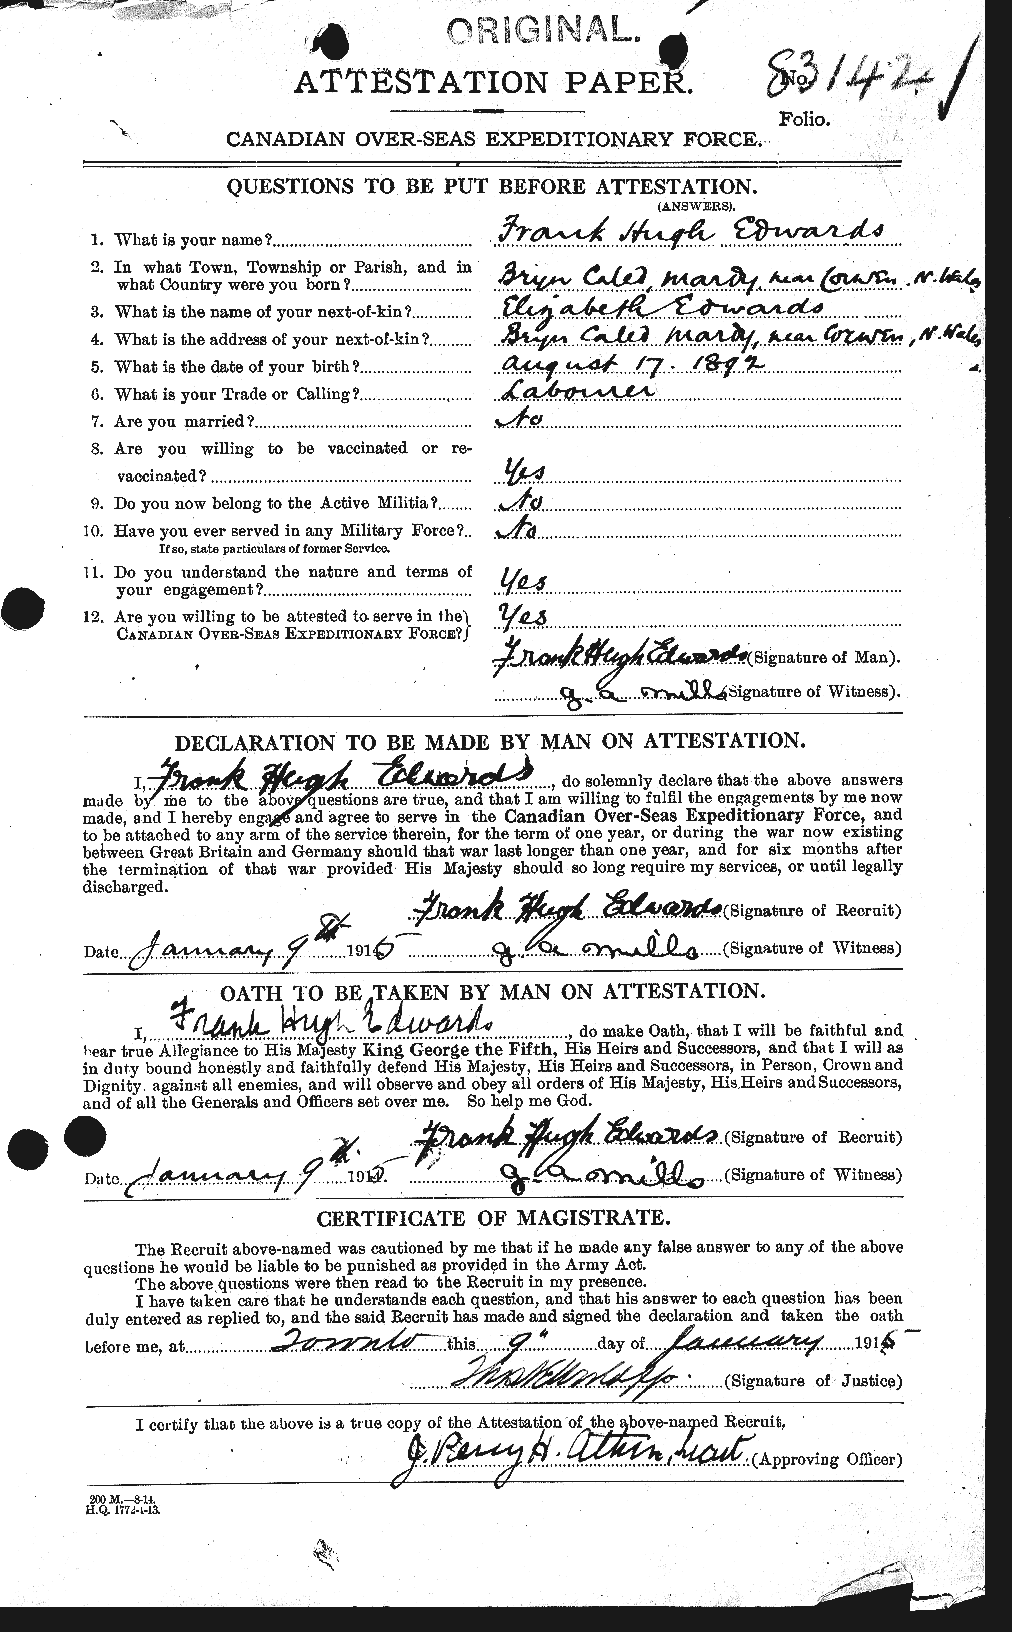 Personnel Records of the First World War - CEF 309053a